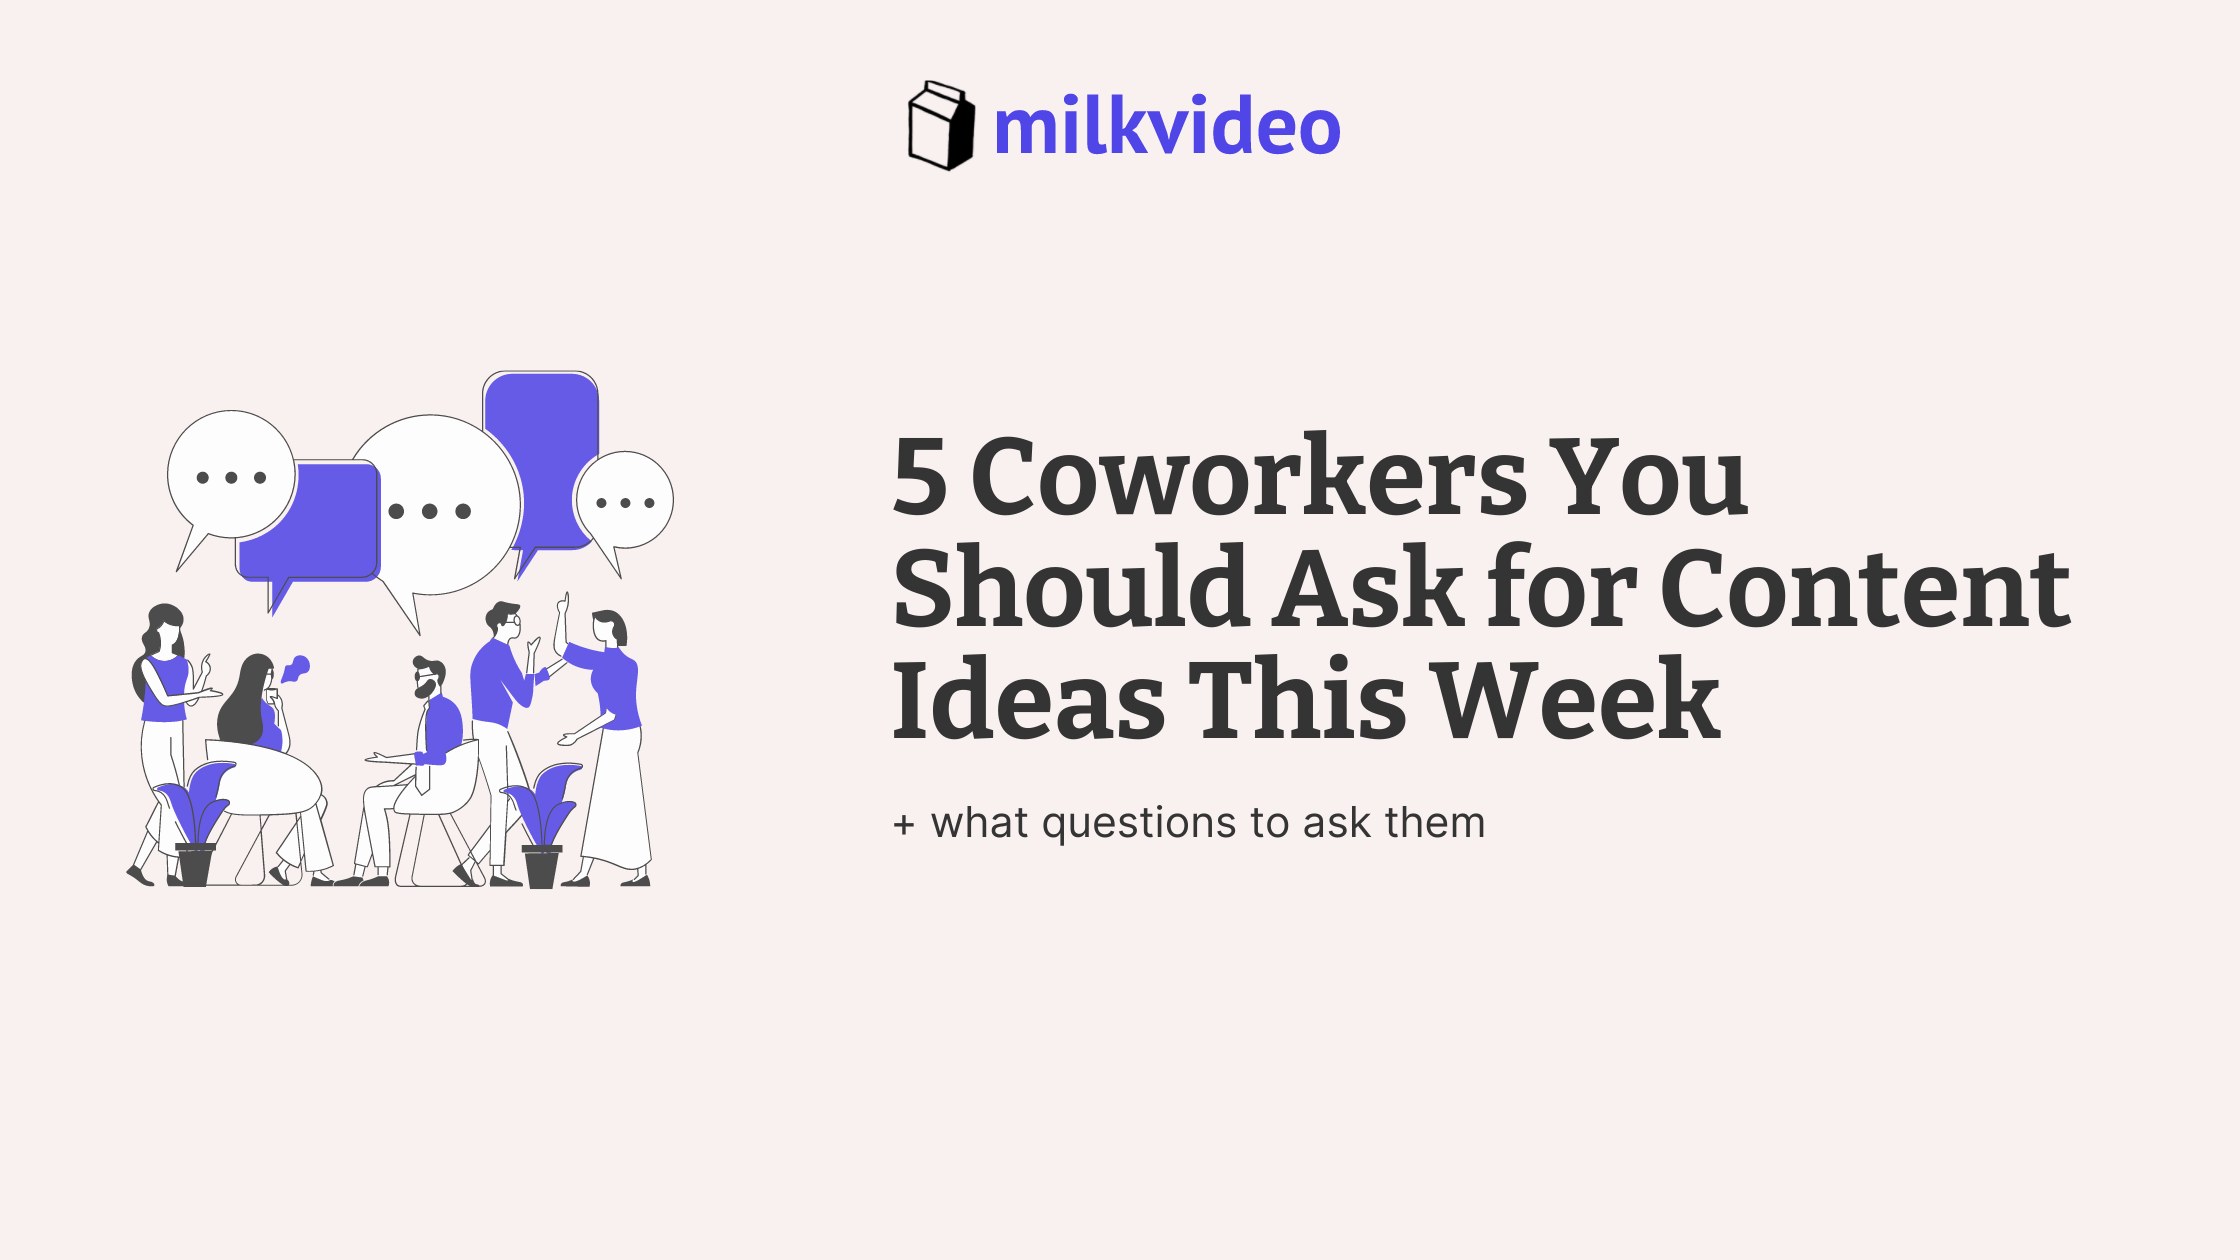 5 Coworkers to ask for content